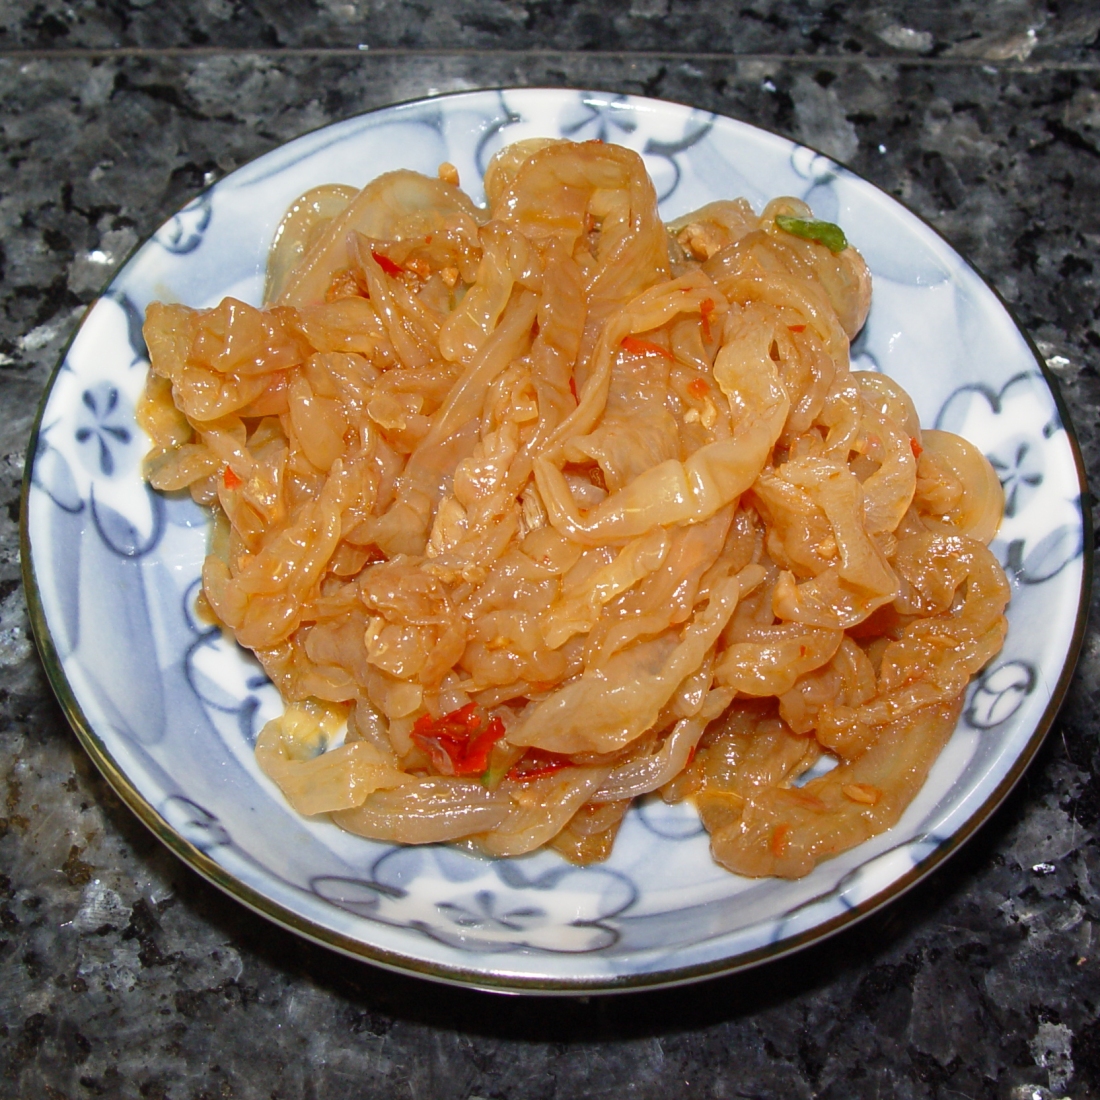 Source: https://en.wikipedia.org/wiki/File:Jellyfish_sesame_oil_and_chili_sauce.jpg By: Howcheng https://commons.wikimedia.org/wiki/User:Howcheng